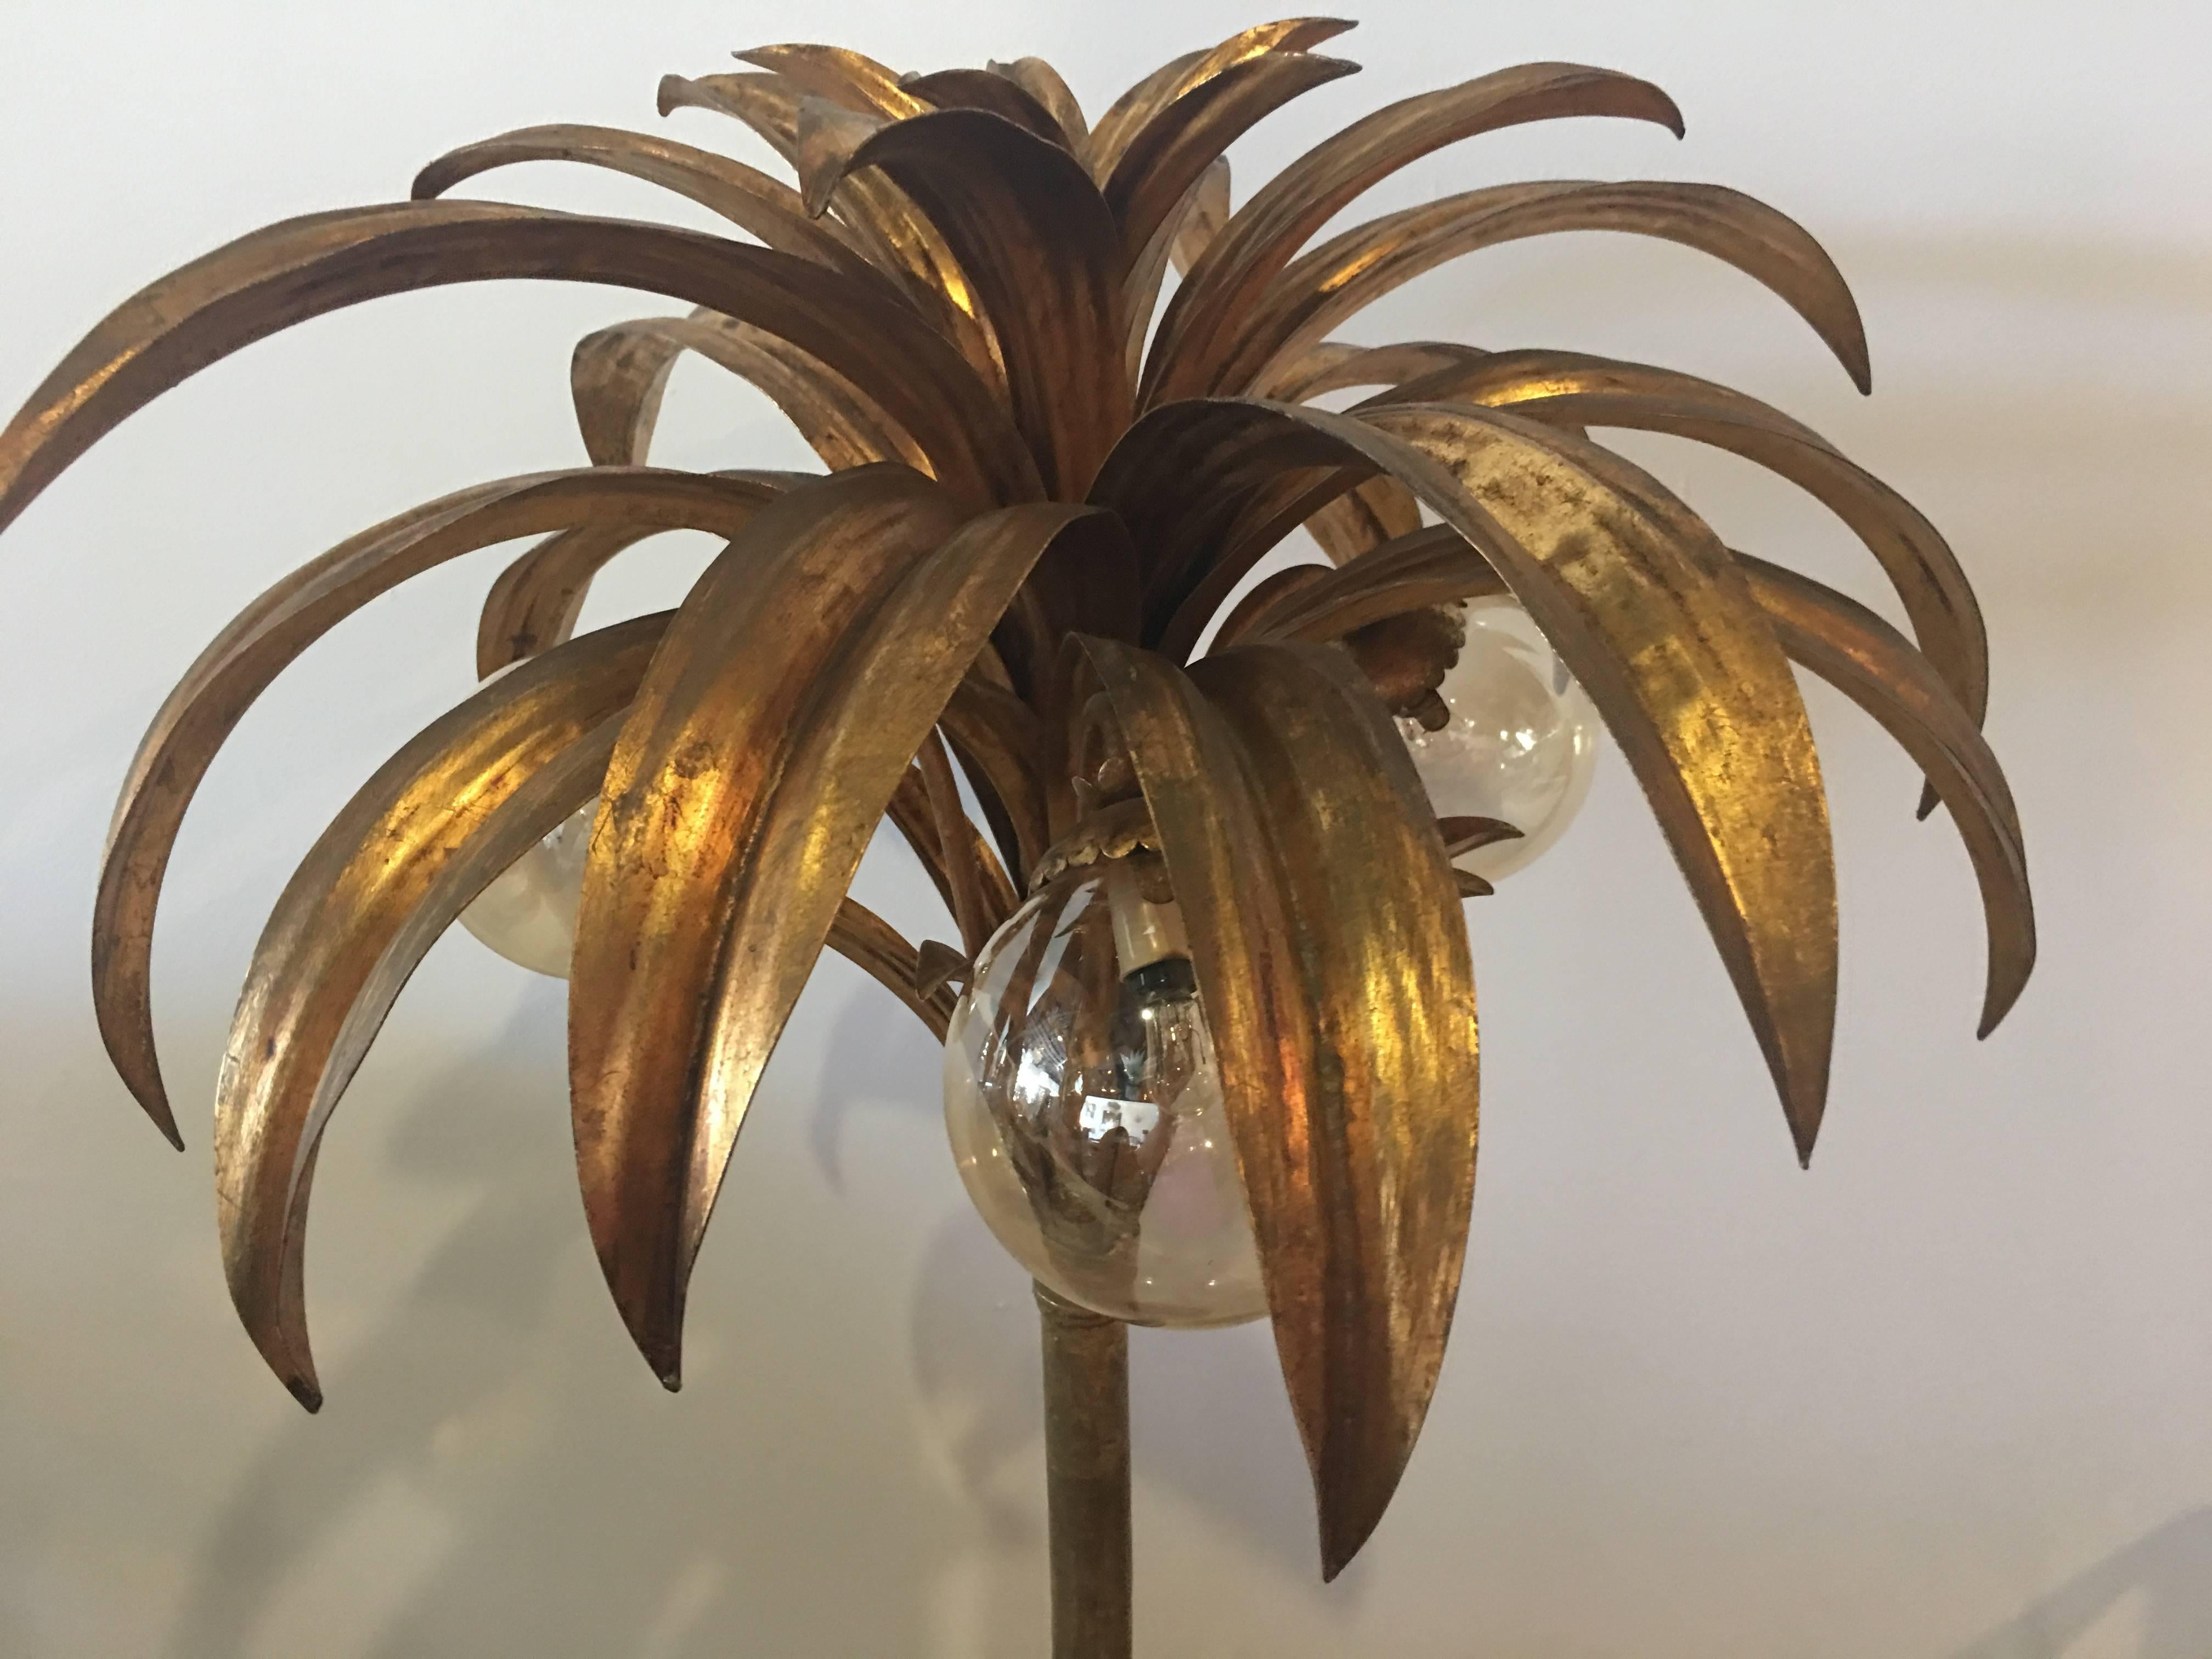 Beautiful vintage gold gilt palm tree floor lamp with three lights that have round glass globes that represent coconuts. Original vintage finish and wiring. In tested working order. Great tropical Palm Beach feel.